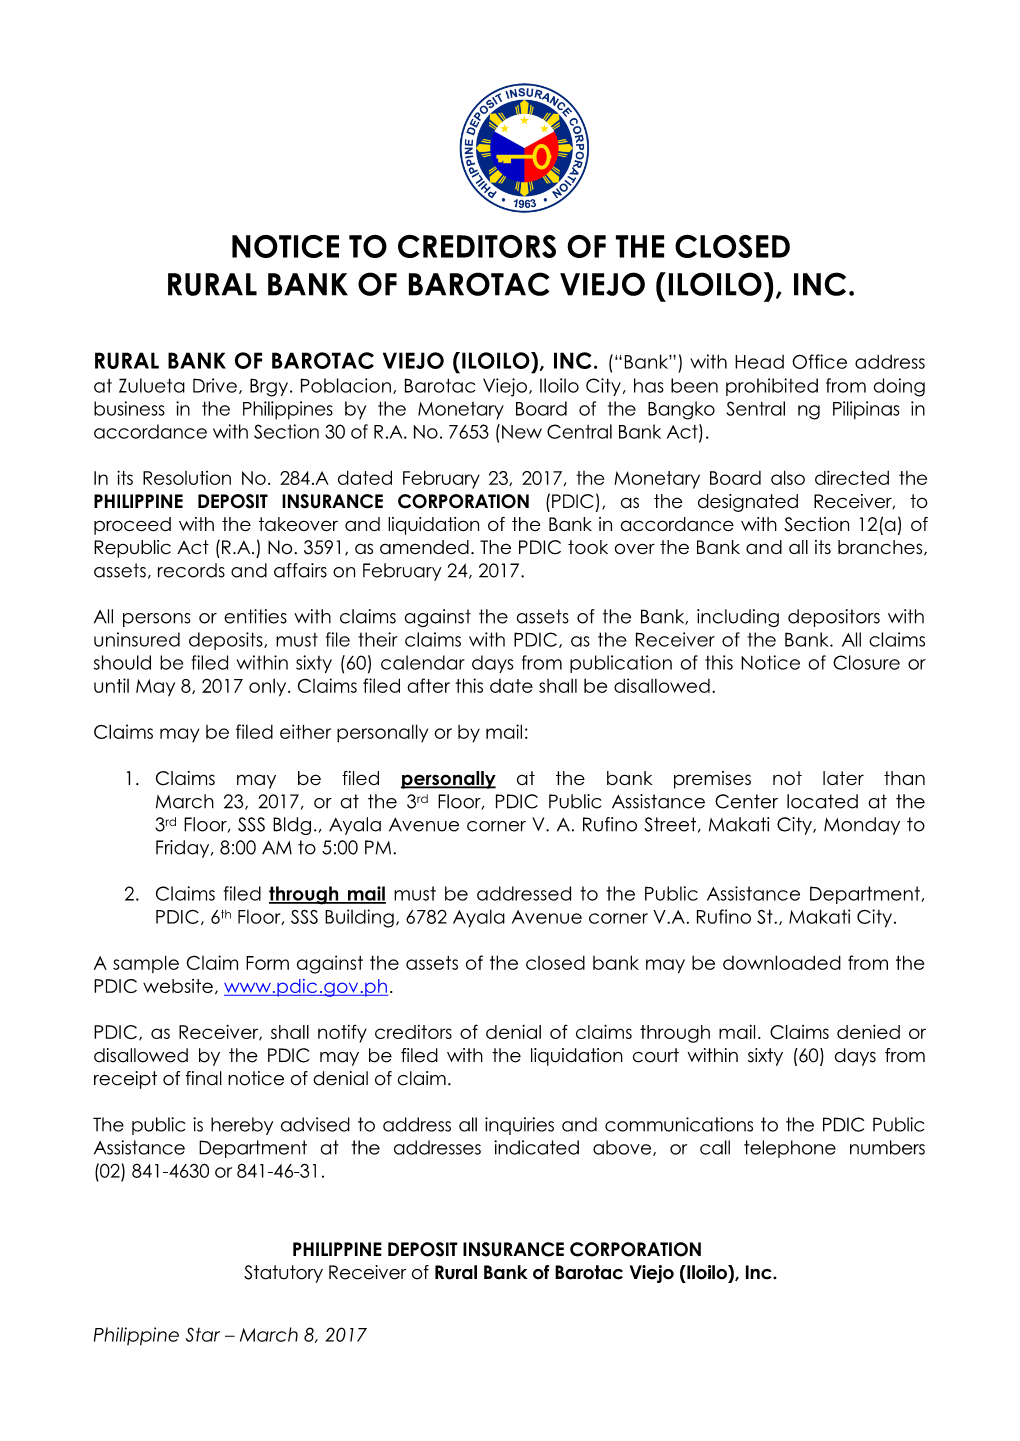 Notice to Creditors of the Closed Rural Bank of Barotac Viejo (Iloilo), Inc